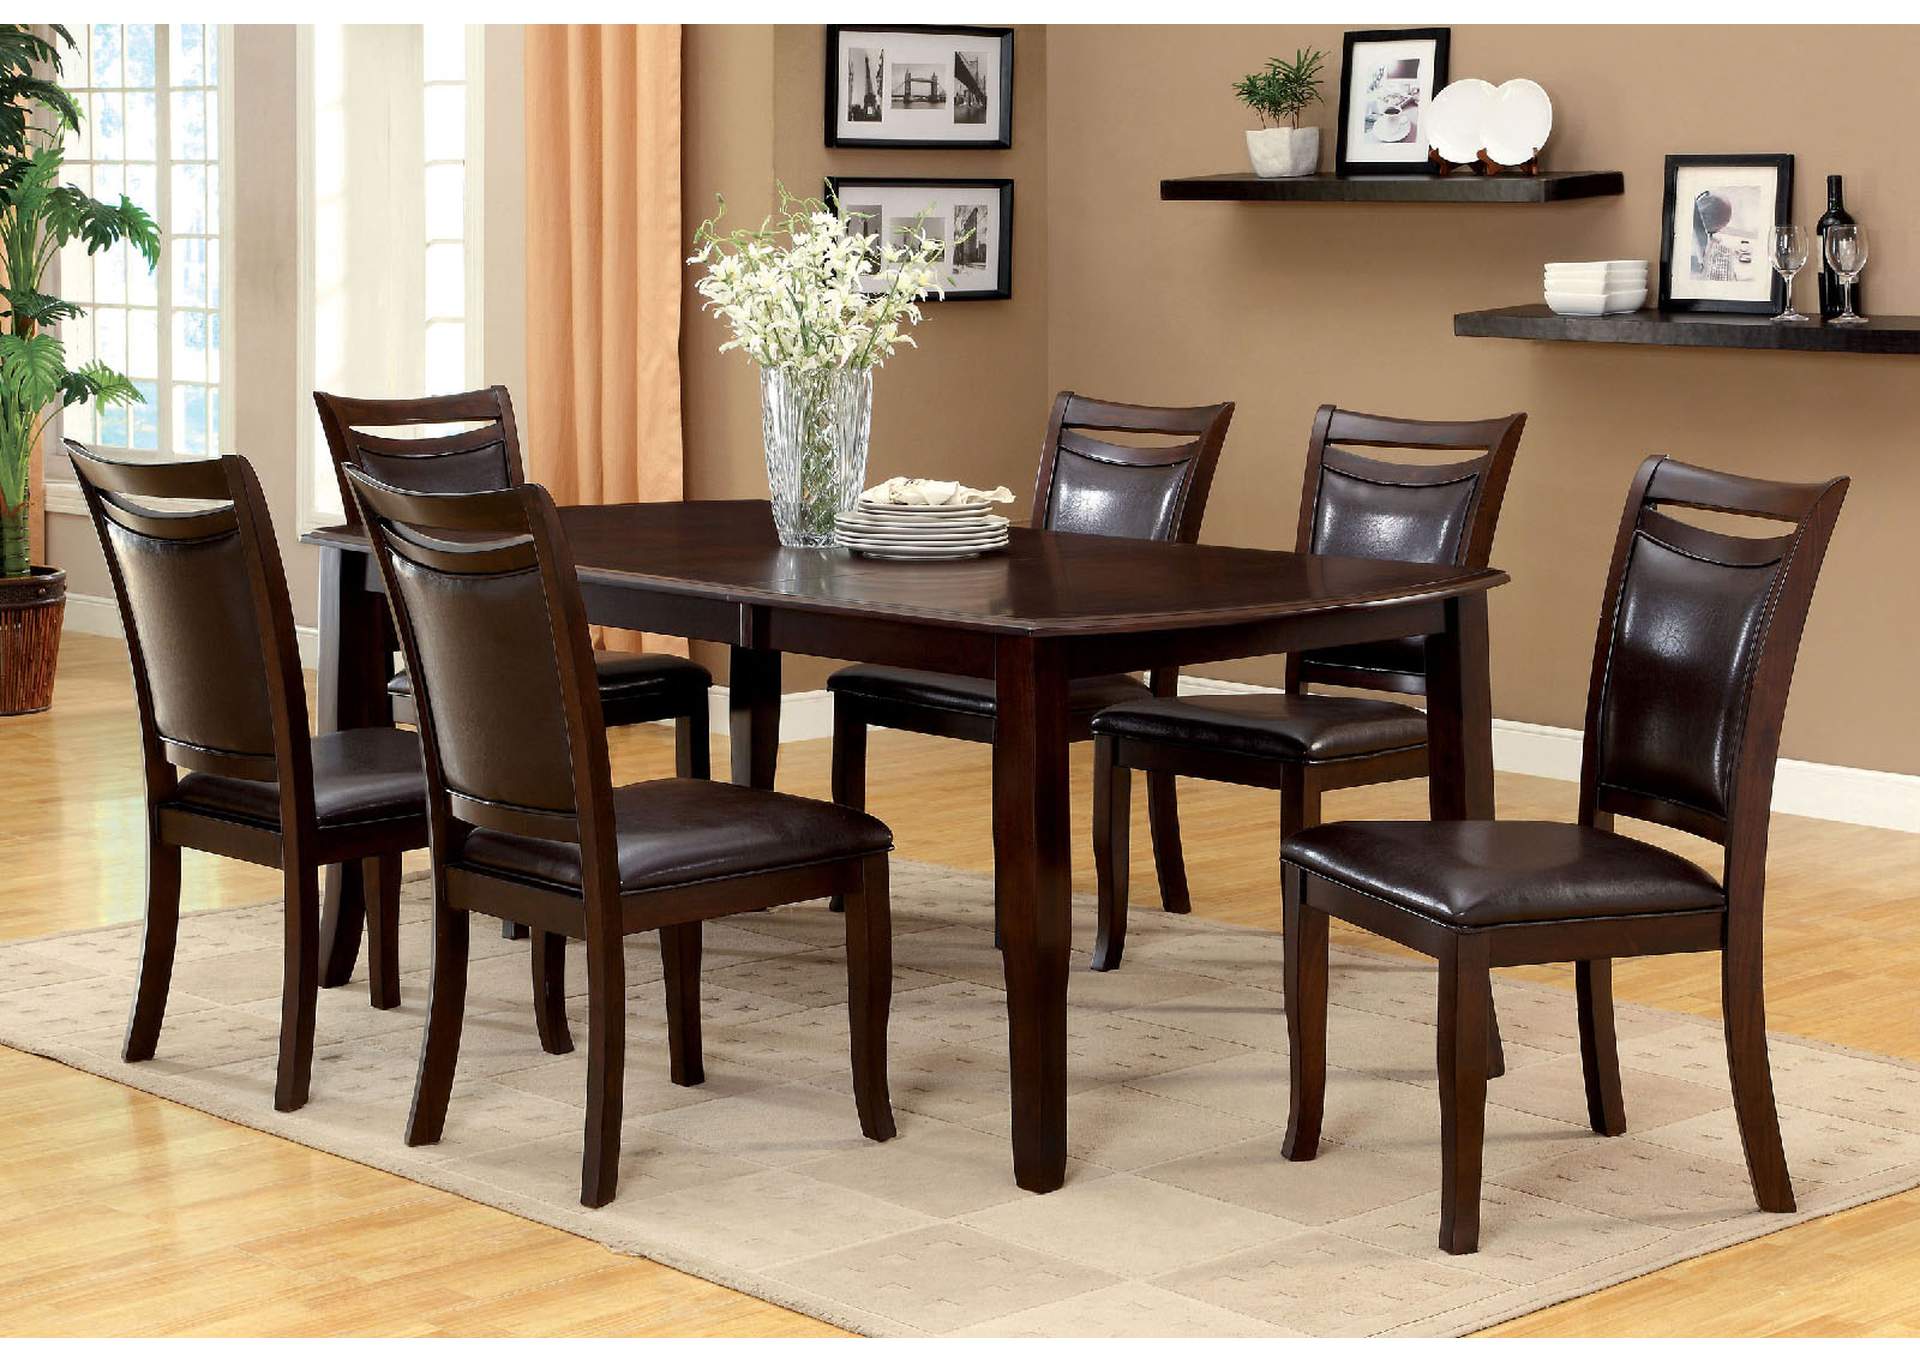 Woodside Dark Cherry Extension Leaf Dining Table w/4 Side Chairs,Furniture of America TX